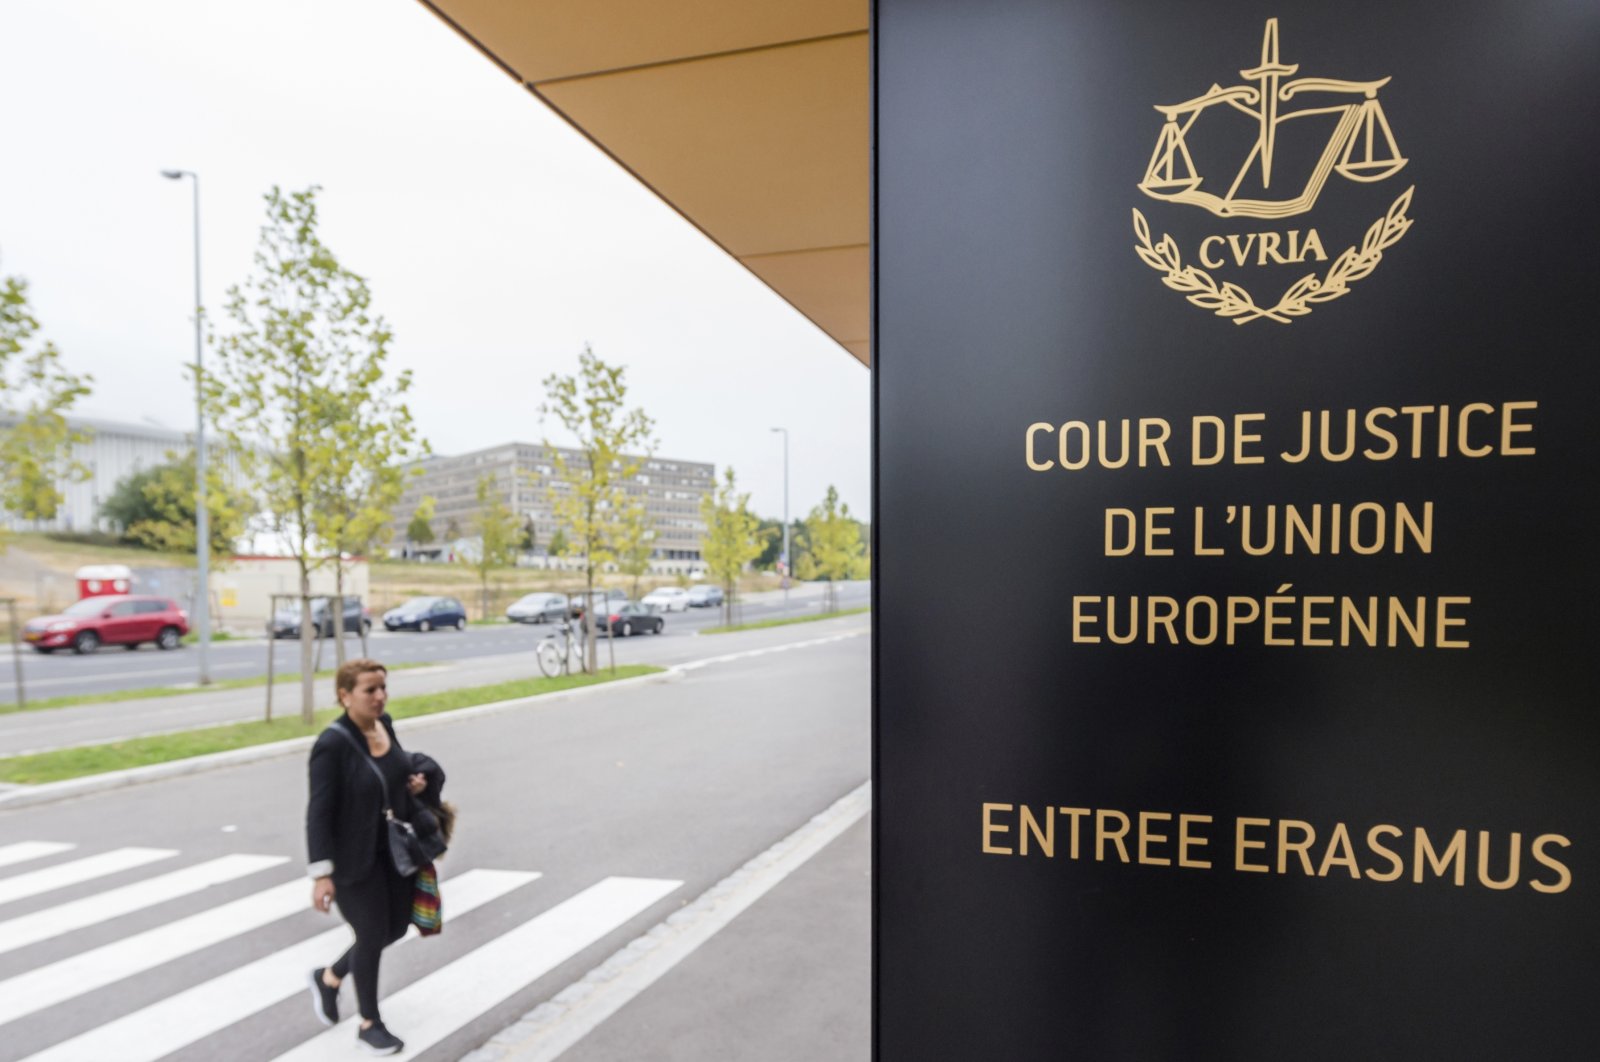 In this Oct. 5, 2015 file photo, a woman walks by the entrance to the European Court of Justice in Luxembourg. (AP Photo)